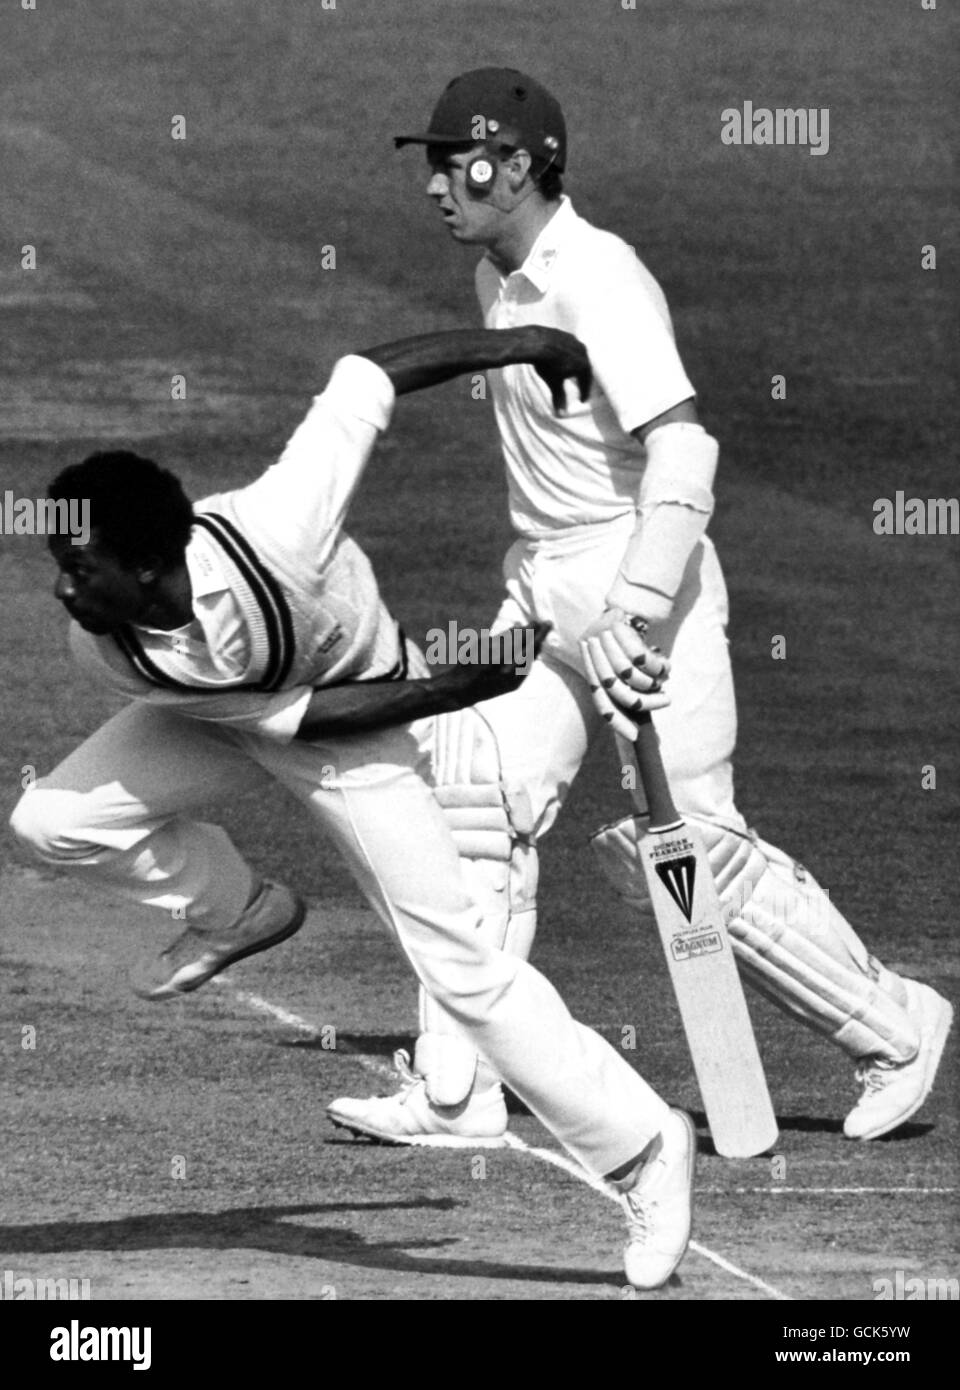 Cricket - Middlesex / Essex - Britannic Assurance County Championship 1985 - Lord's Cricket Ground. Il bowler Middlesex Neil Williams in azione Foto Stock